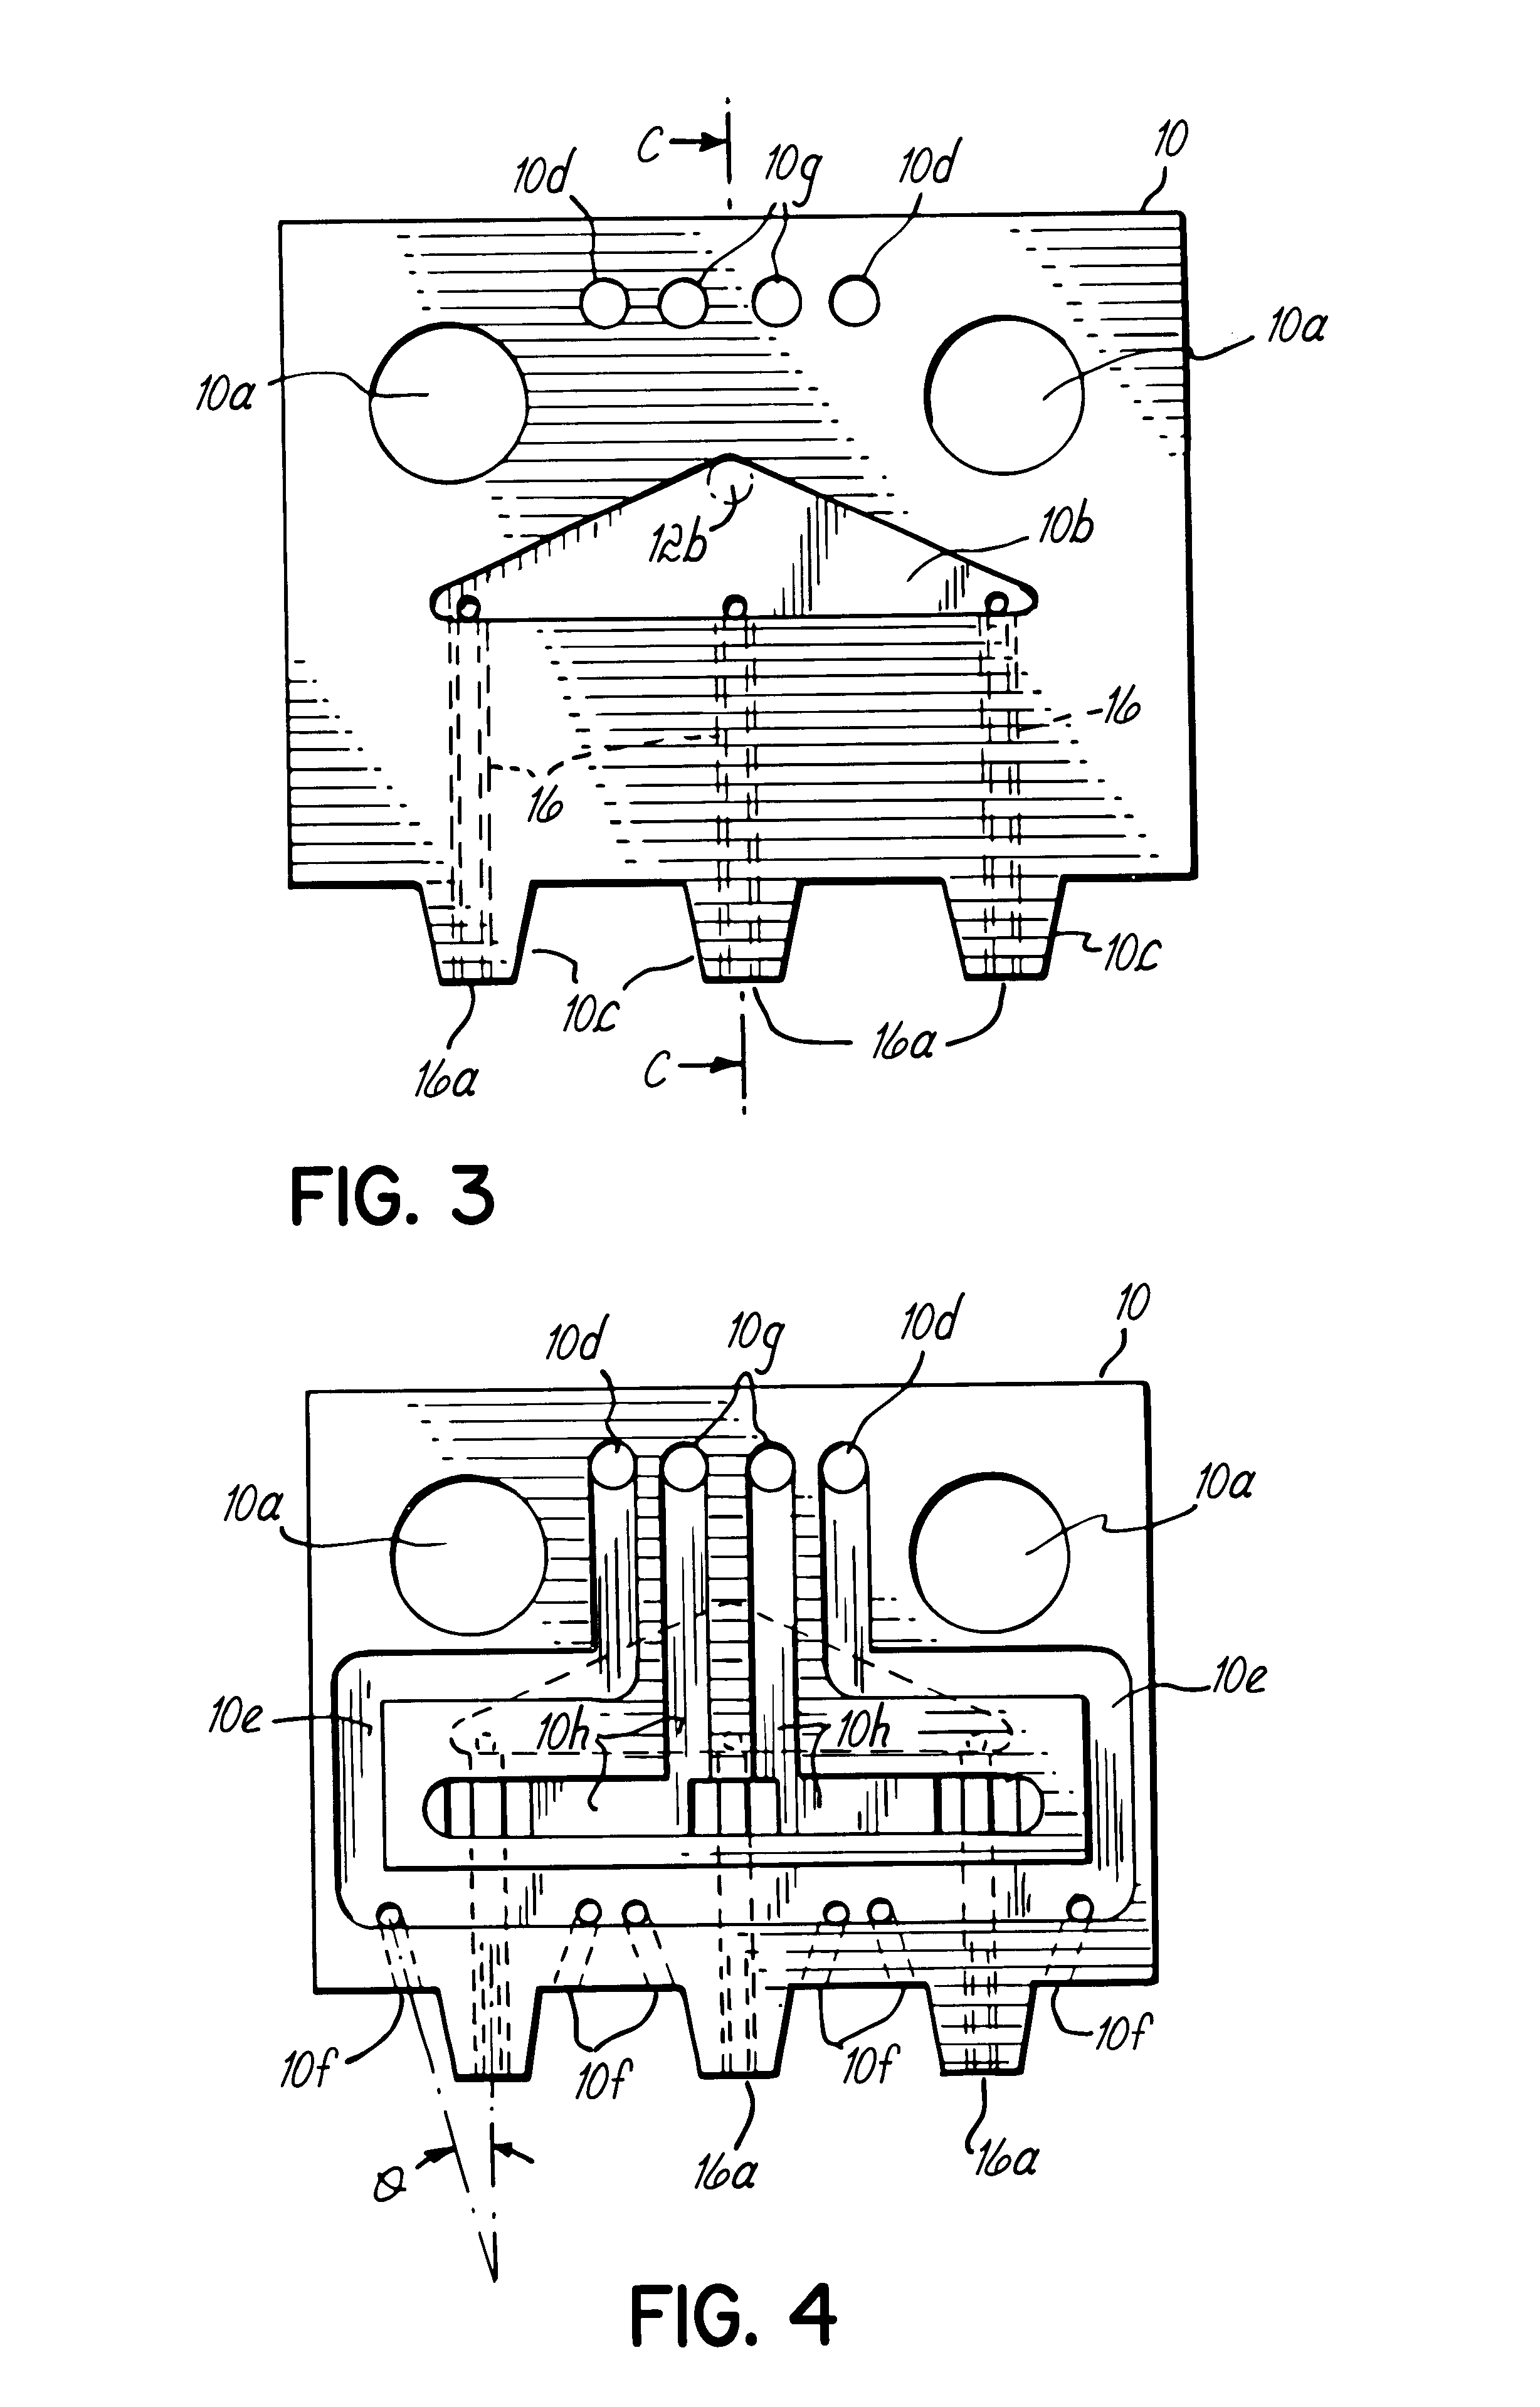 Device and method for applying adhesive filaments to materials such as strands or flat substrates